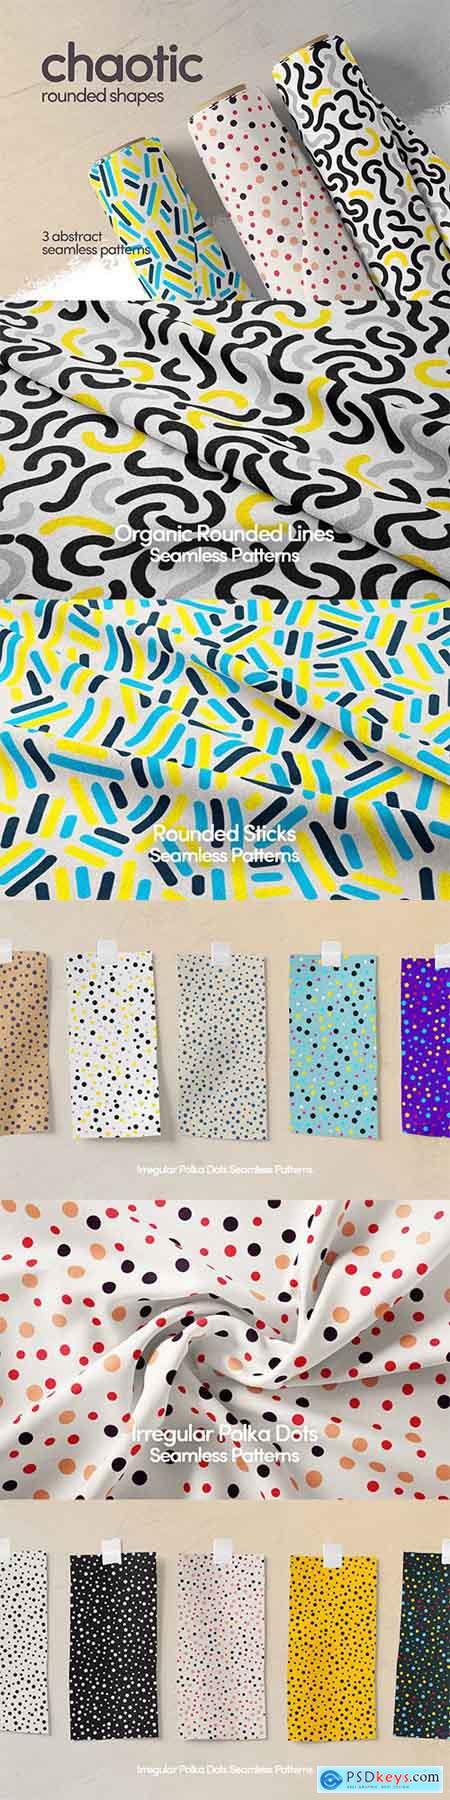 Colorful Chaotic Rounded Shapes Seamless Patterns